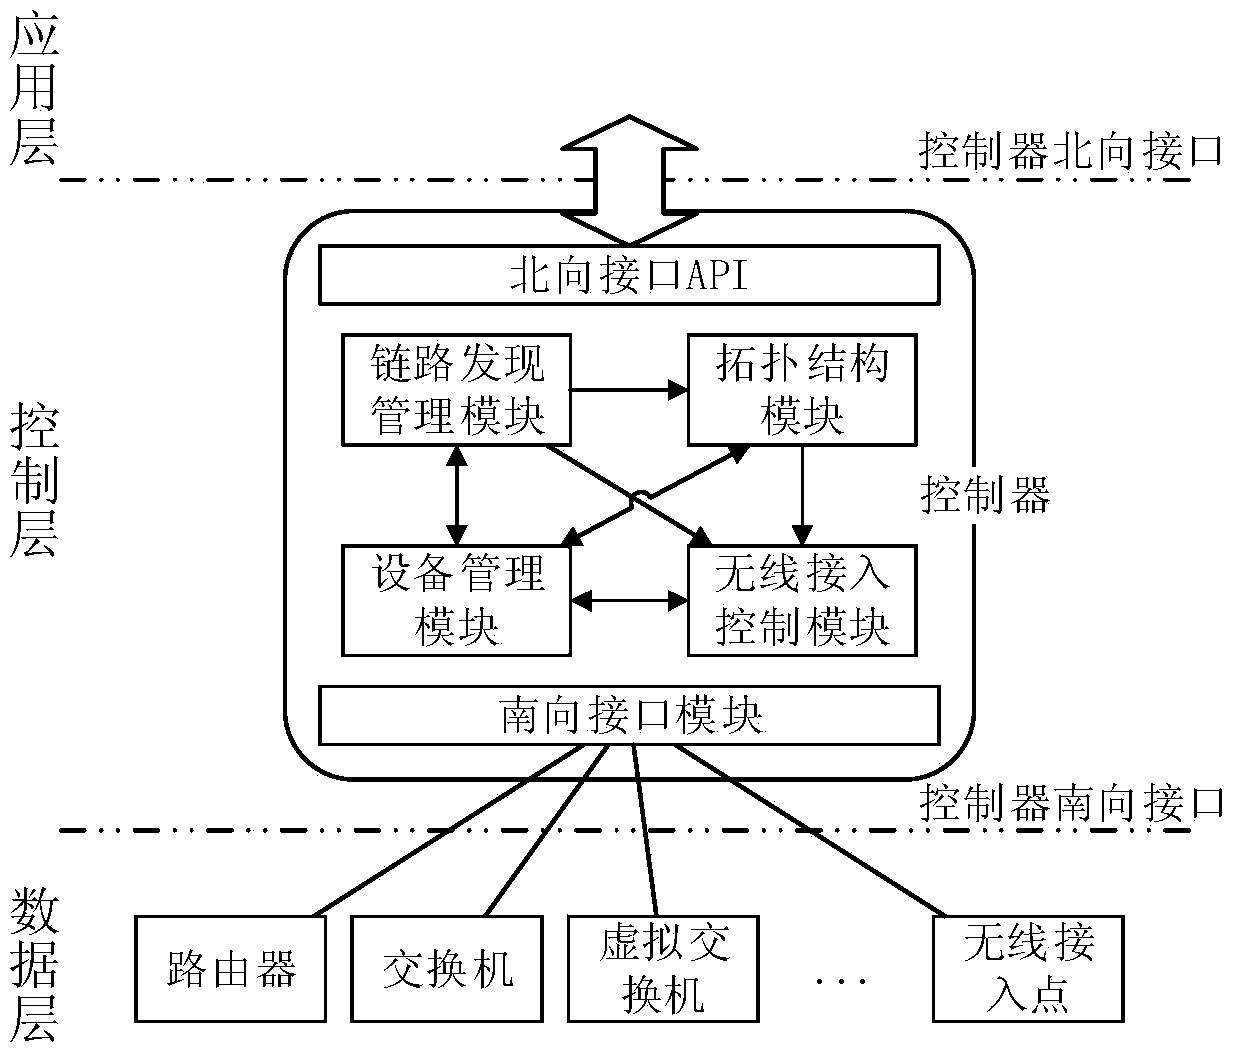 Wireless access control method and device for software defined network (SDN)